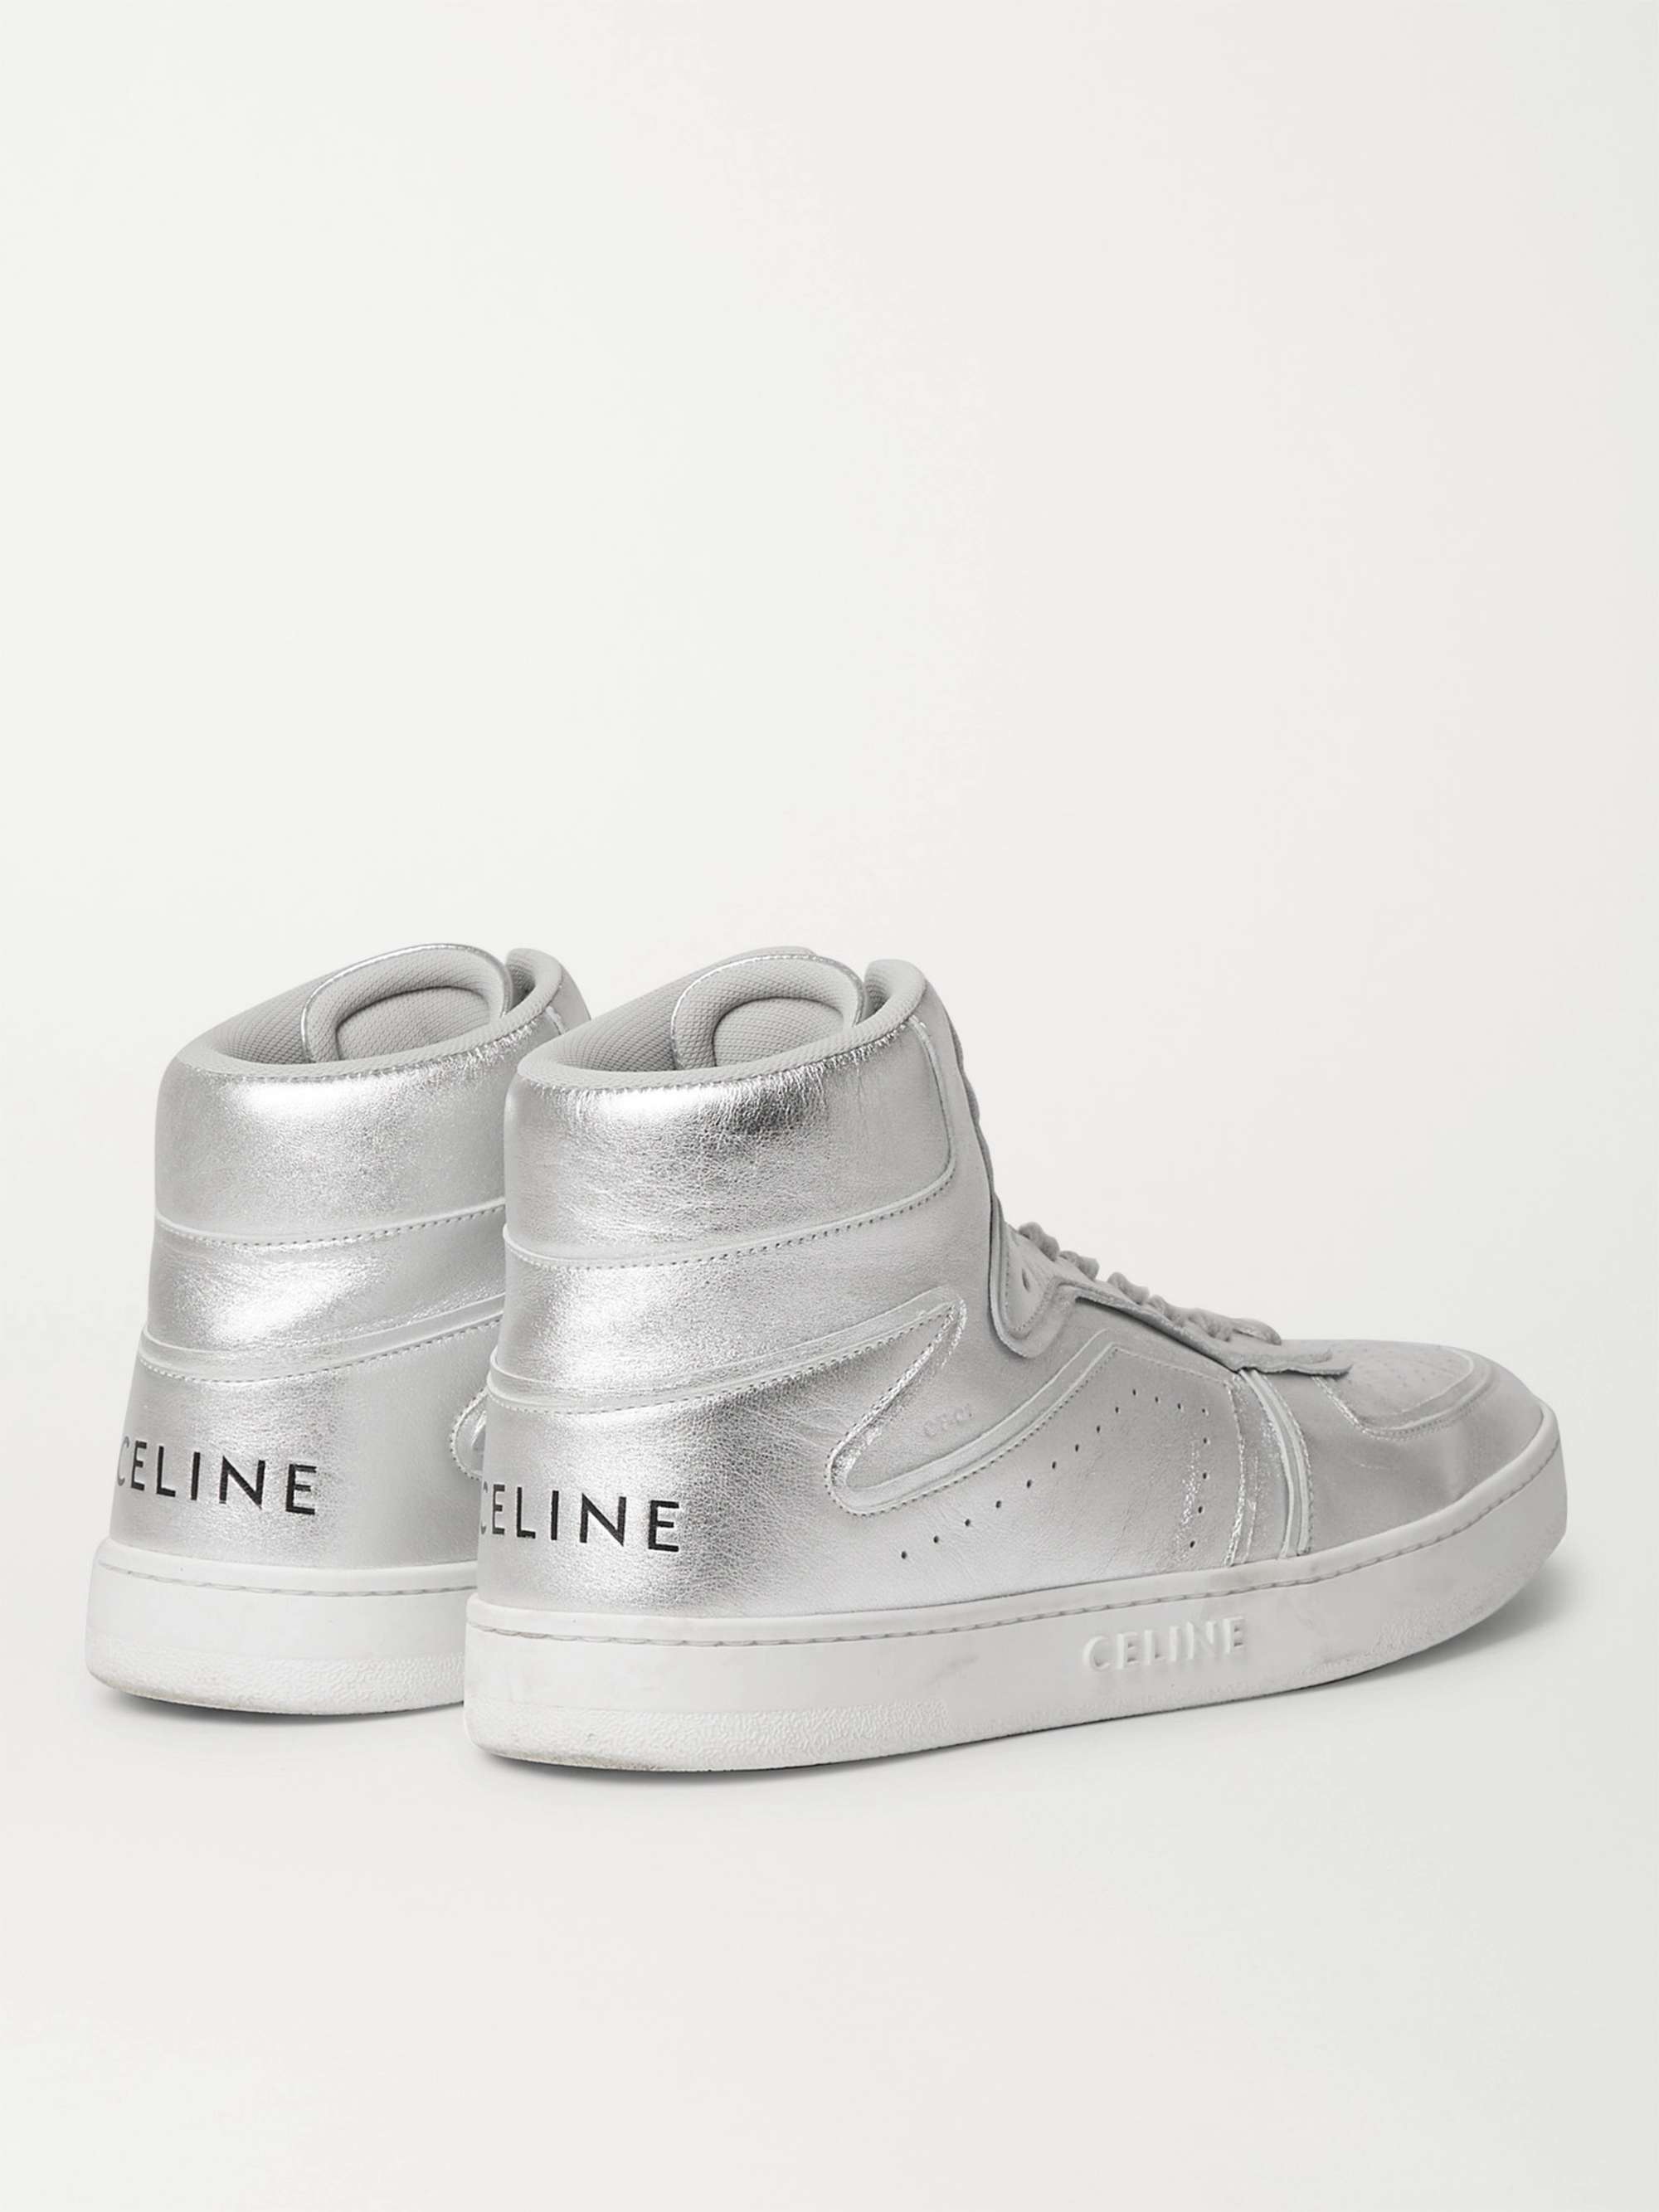 CELINE HOMME Z CT-01 Mesh and Suede High-Top Sneakers